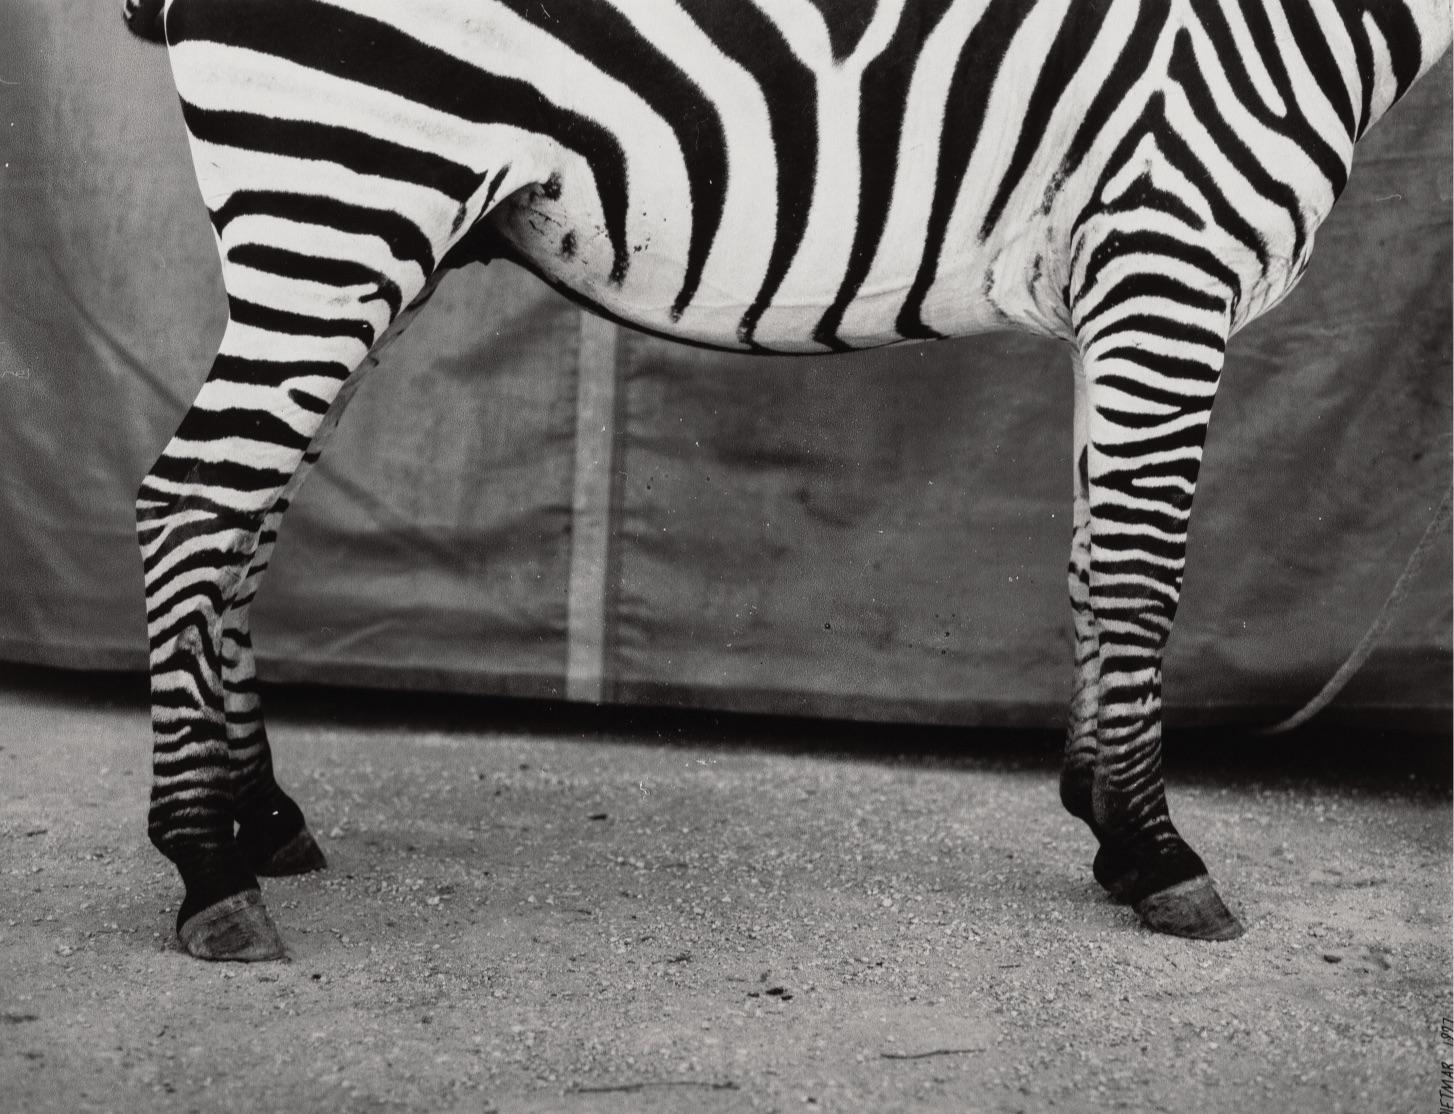 Dietmar Busse (German/American, 20th Century)
Untitled (Zebra), 1997
Gelatin silver
13-3/4 x 18 inches (34.9 x 45.7 cm)
Signed and dated in ink on recto.	

Artist's Biography:
Dietmar Busse (b. 1966) lives and works in New York.  He was born in